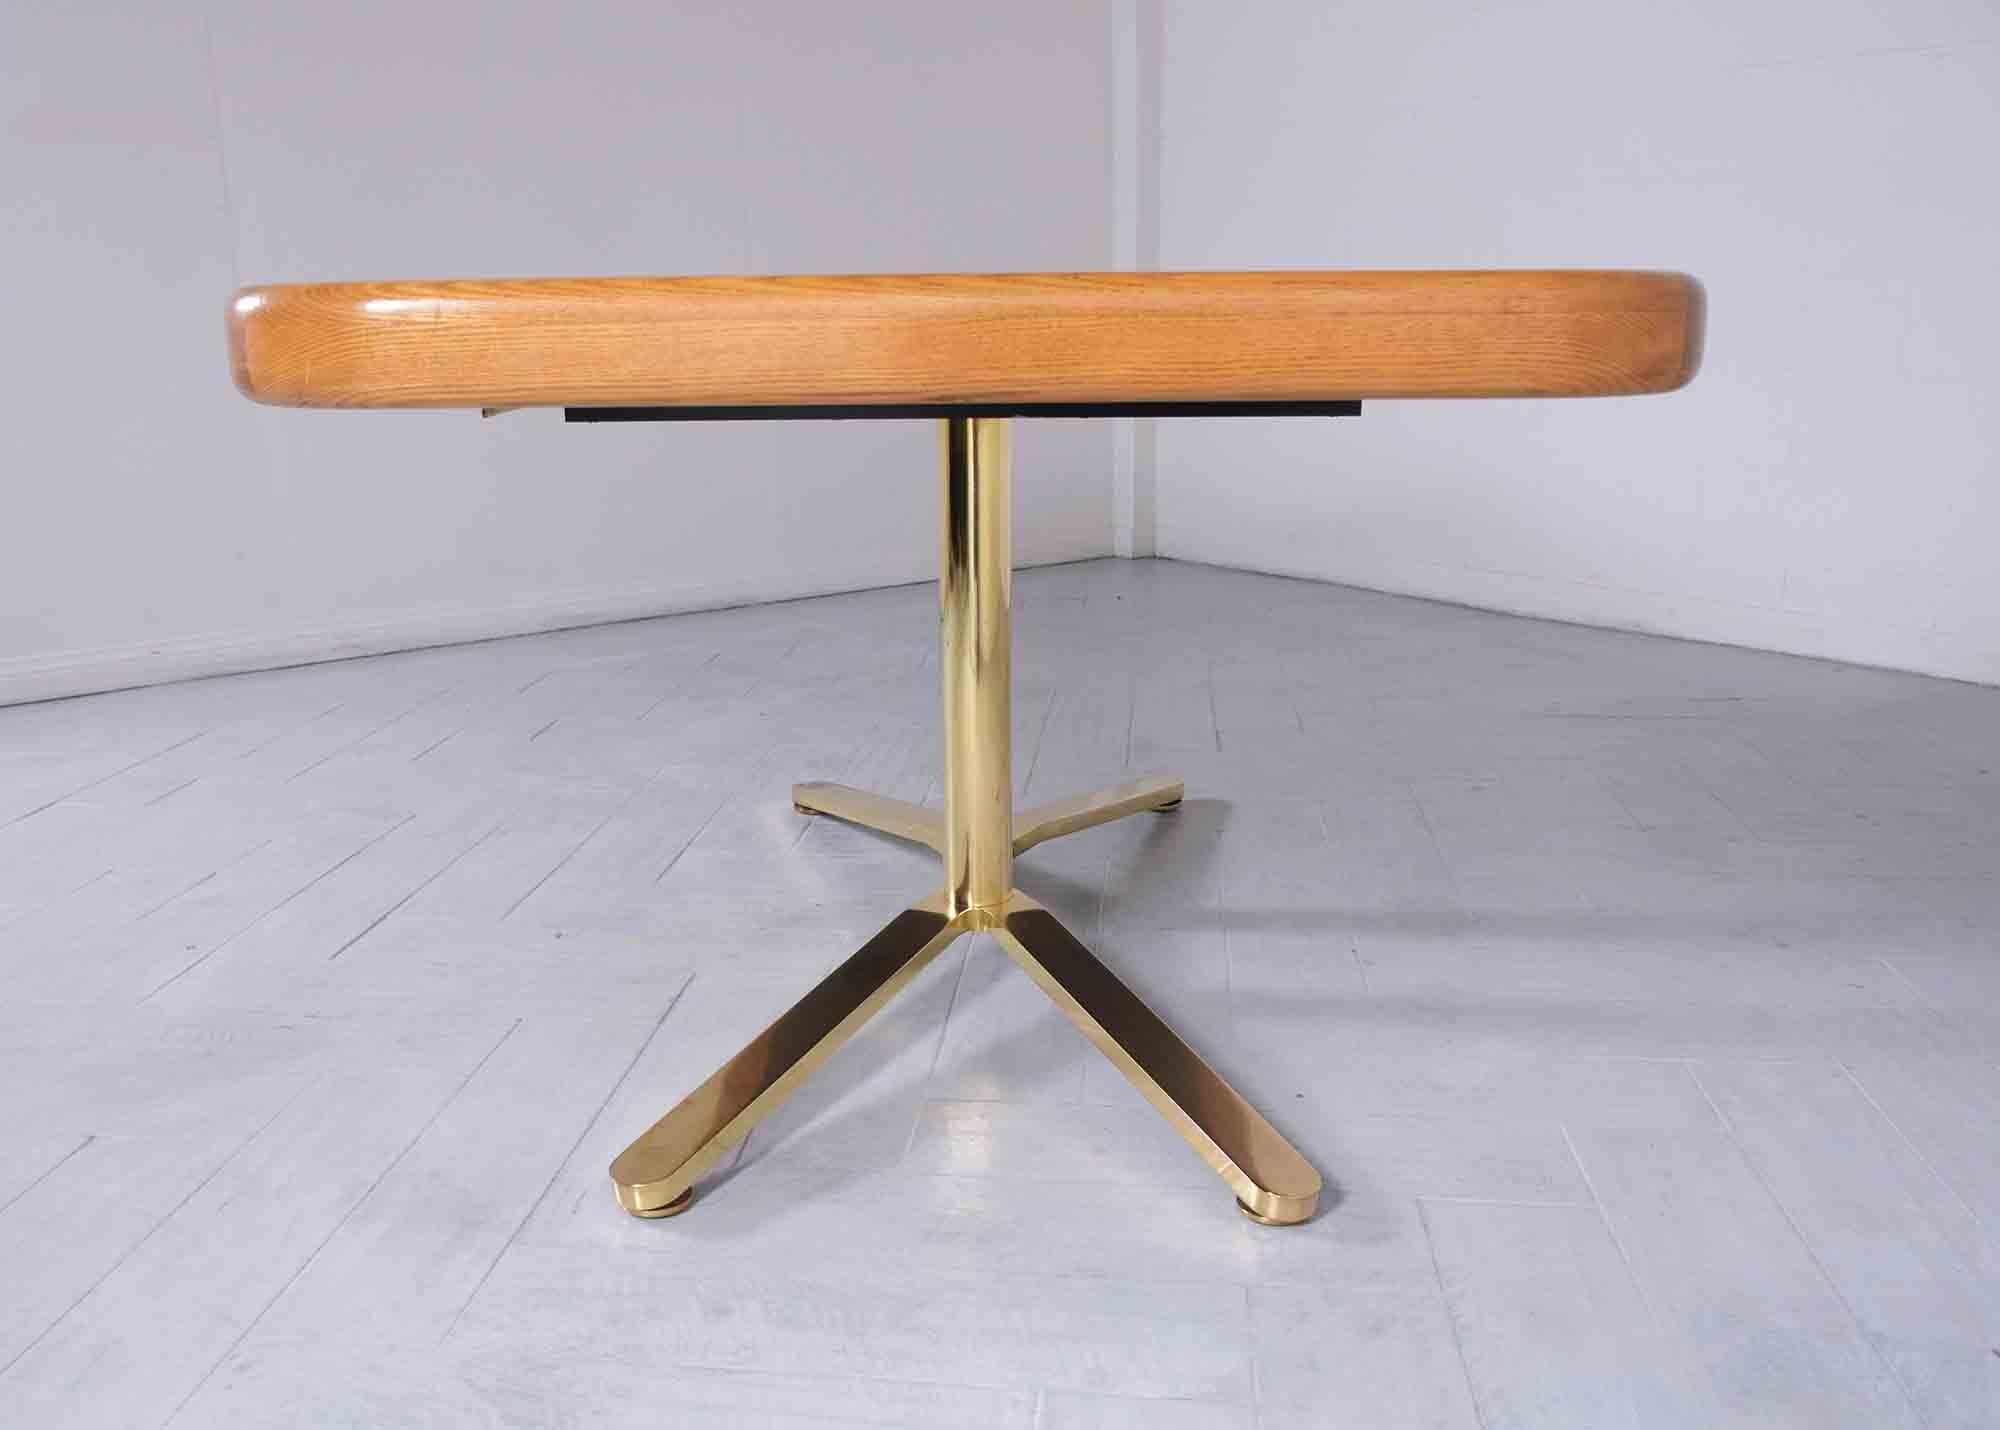 Restored 1960s Mid-Century Modern Oak and Brass Executive Desk For Sale 2